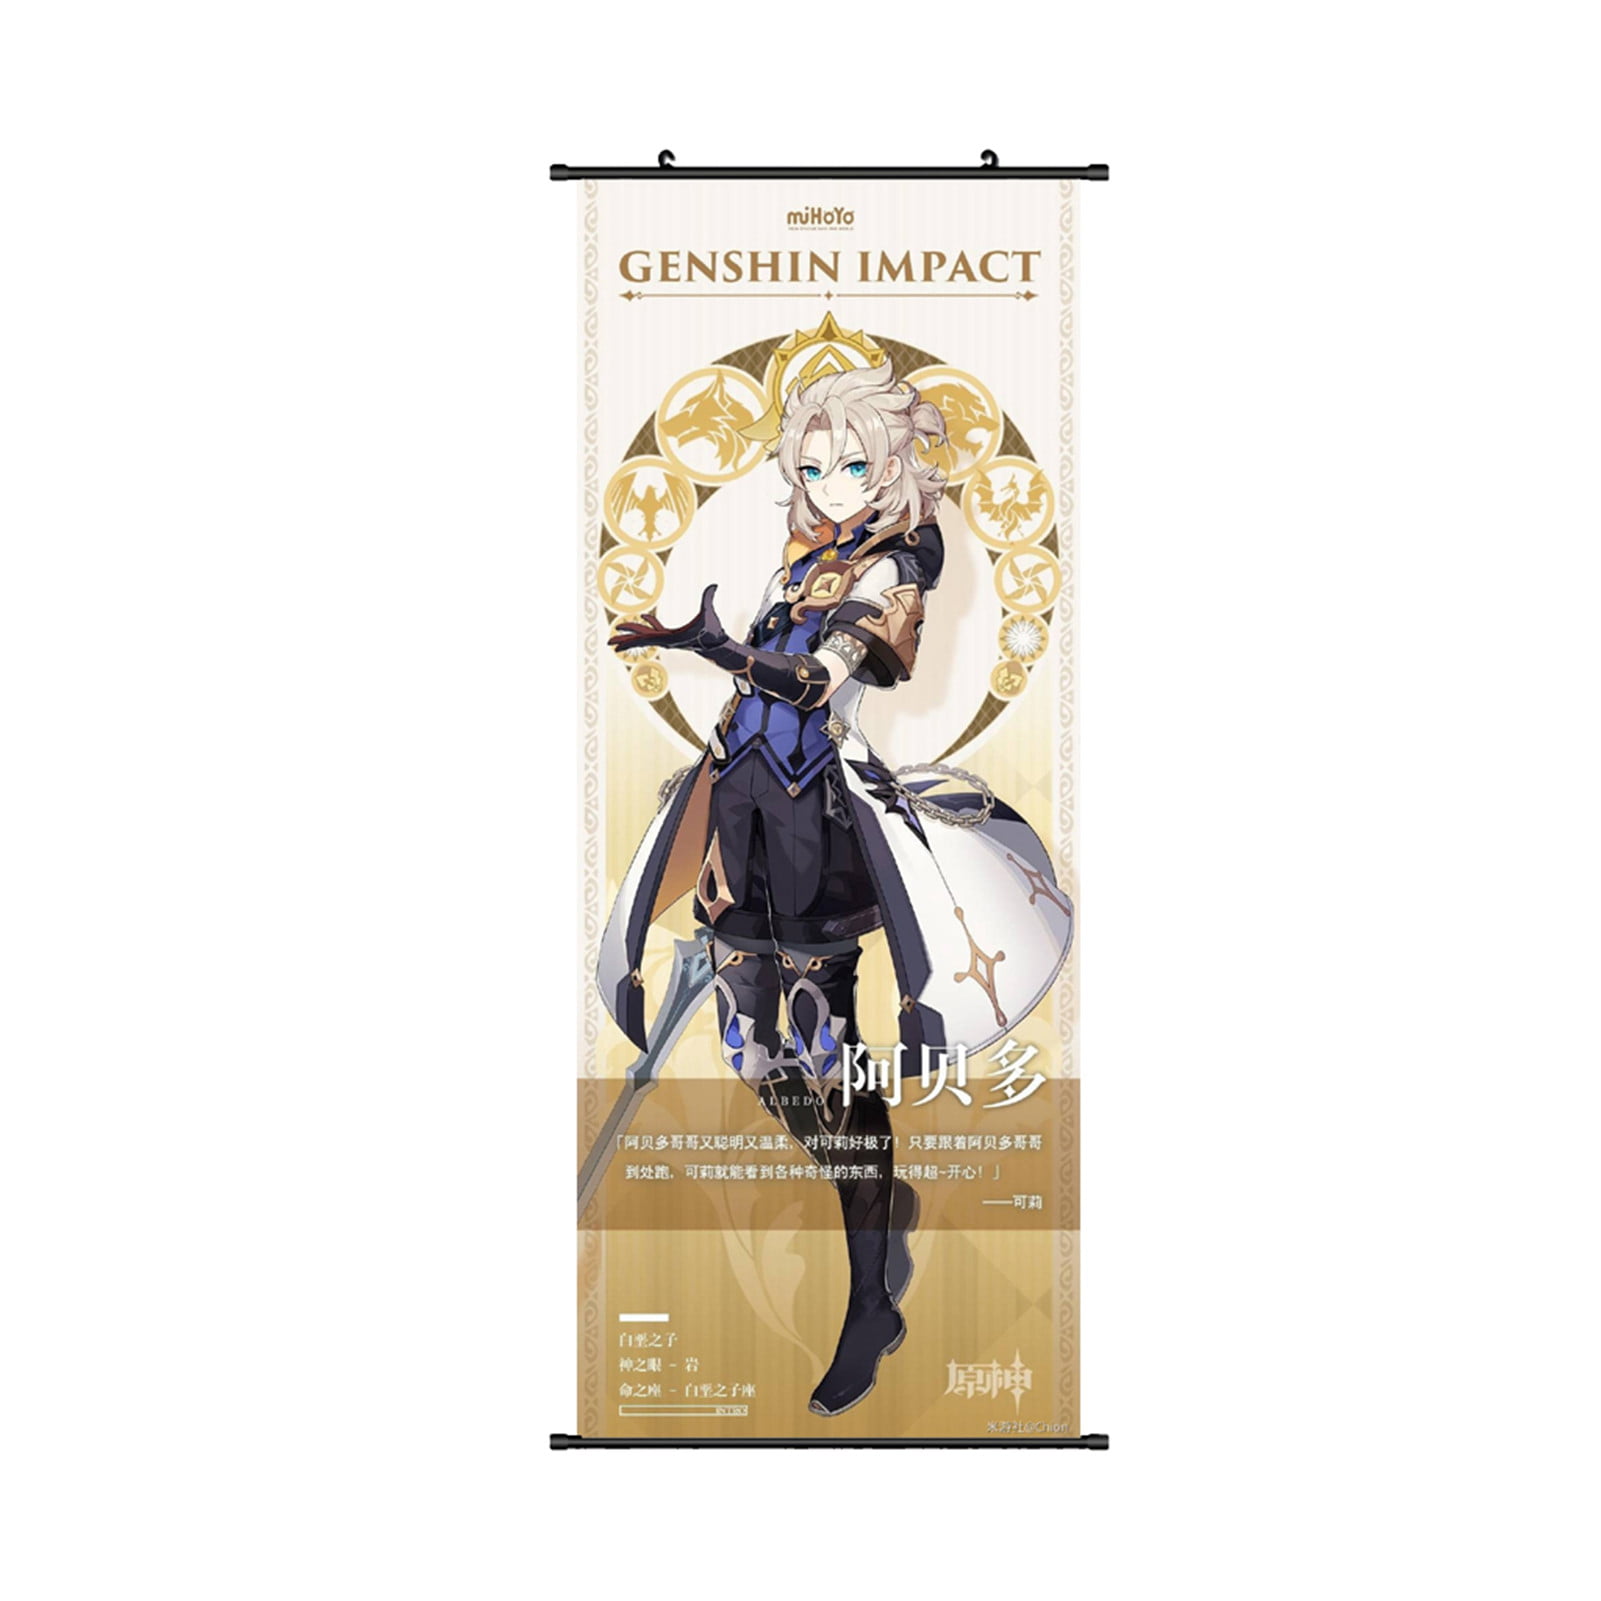 Gothic Samurai Girl Extra Large Tapestry Wall Hanging Art Anime Poster  Fabric | eBay